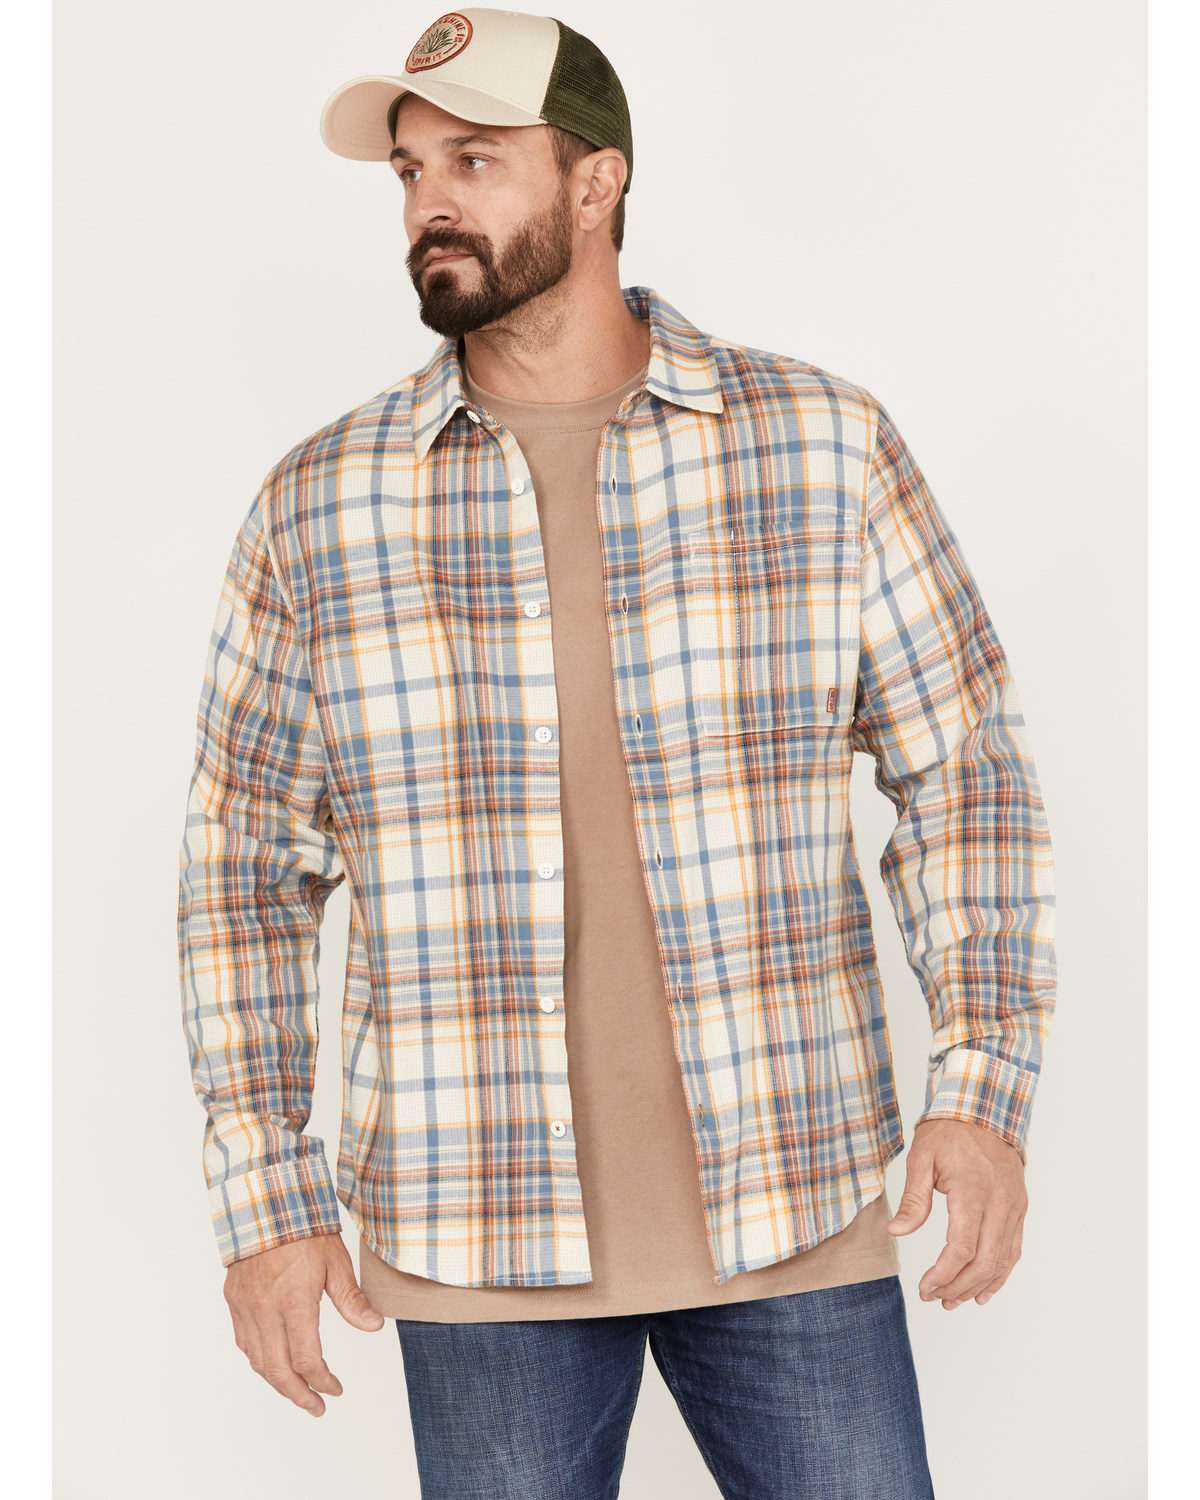 Brothers and Sons Men's Casual Plaid Print Long Sleeve Woven Shirt